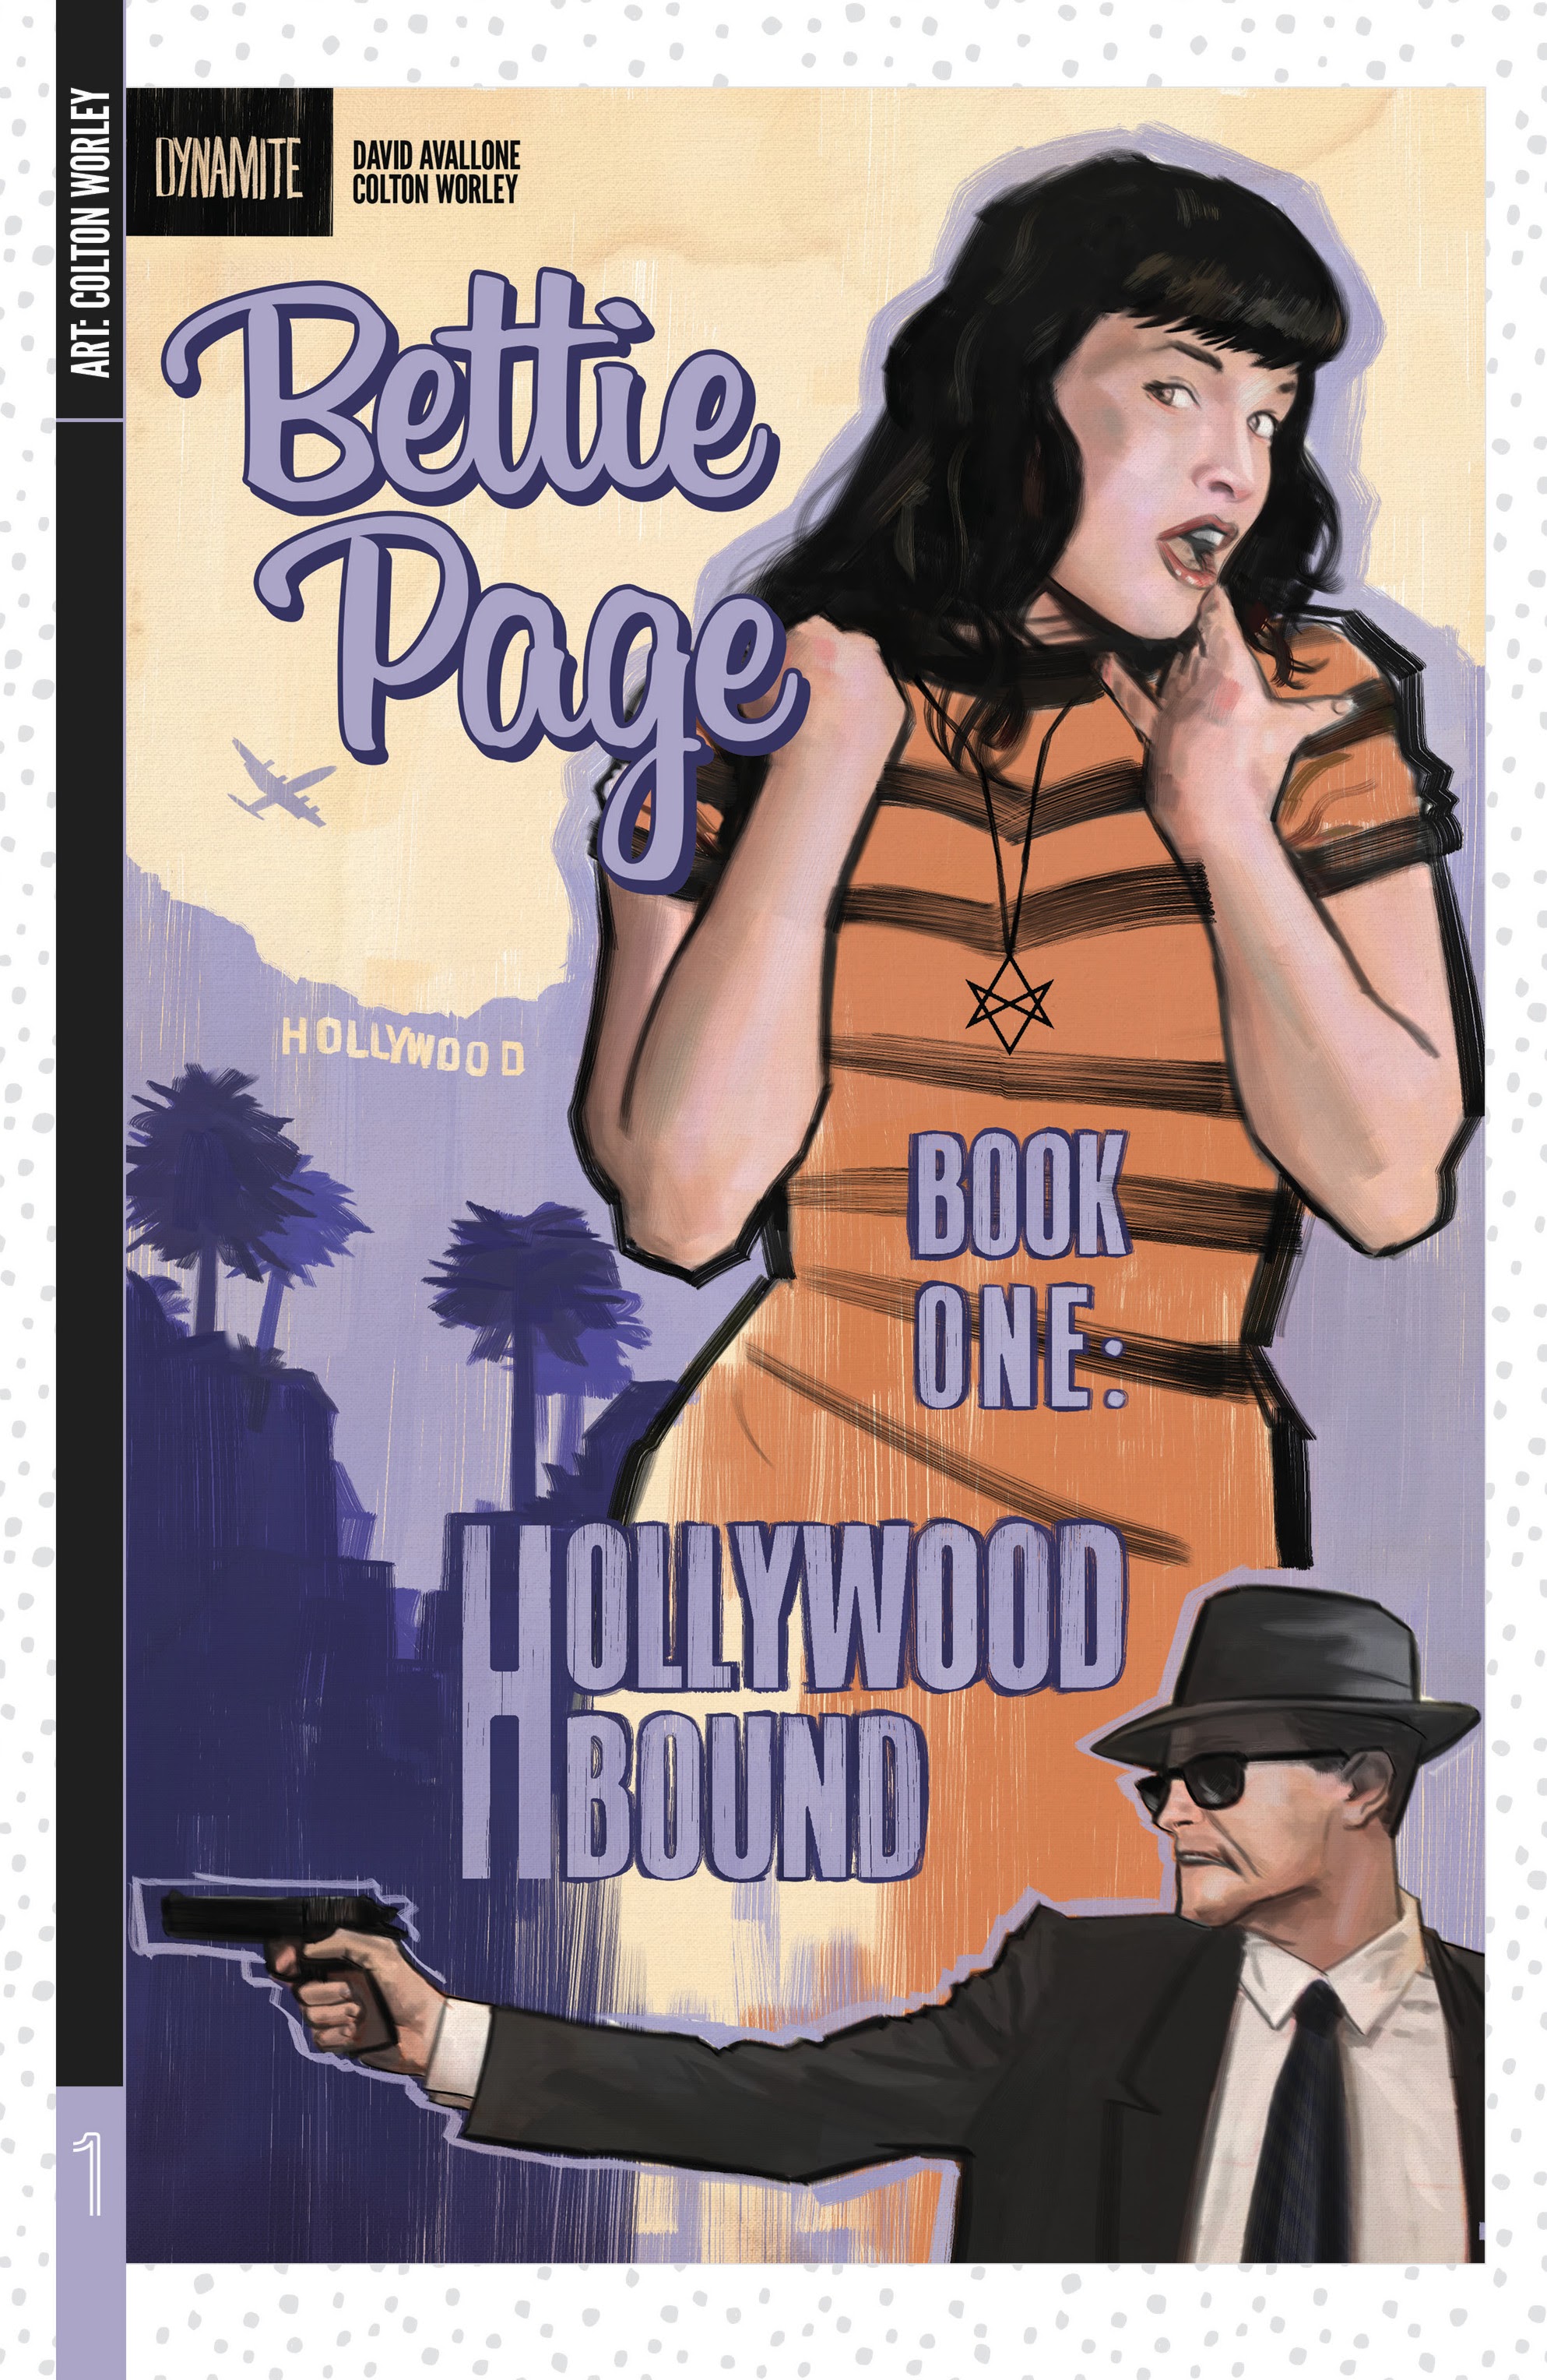 Read online Bettie Page: The Dynamite Covers comic -  Issue # Full - 8